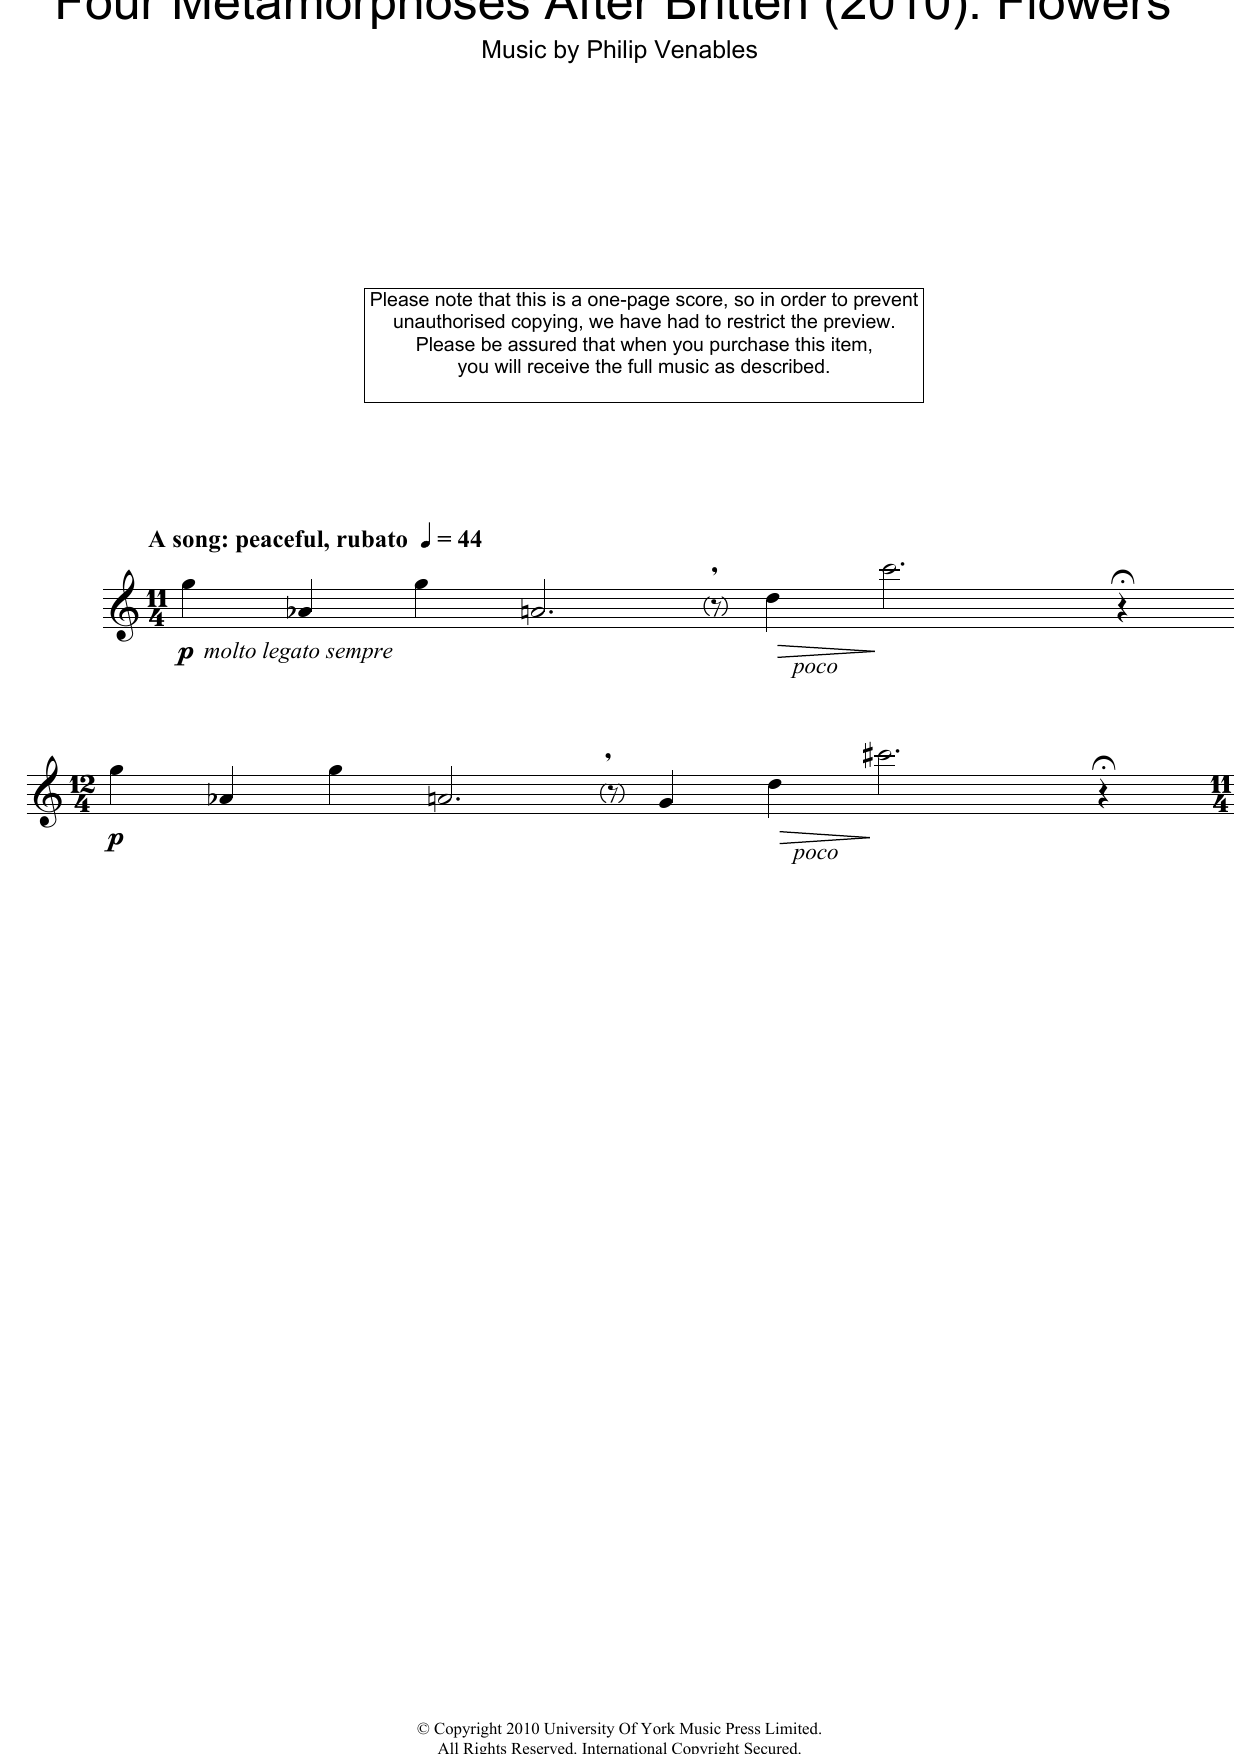 Philip Venables Four Metamorphoses After Britten (2010): Flowers sheet music notes and chords arranged for Oboe Solo